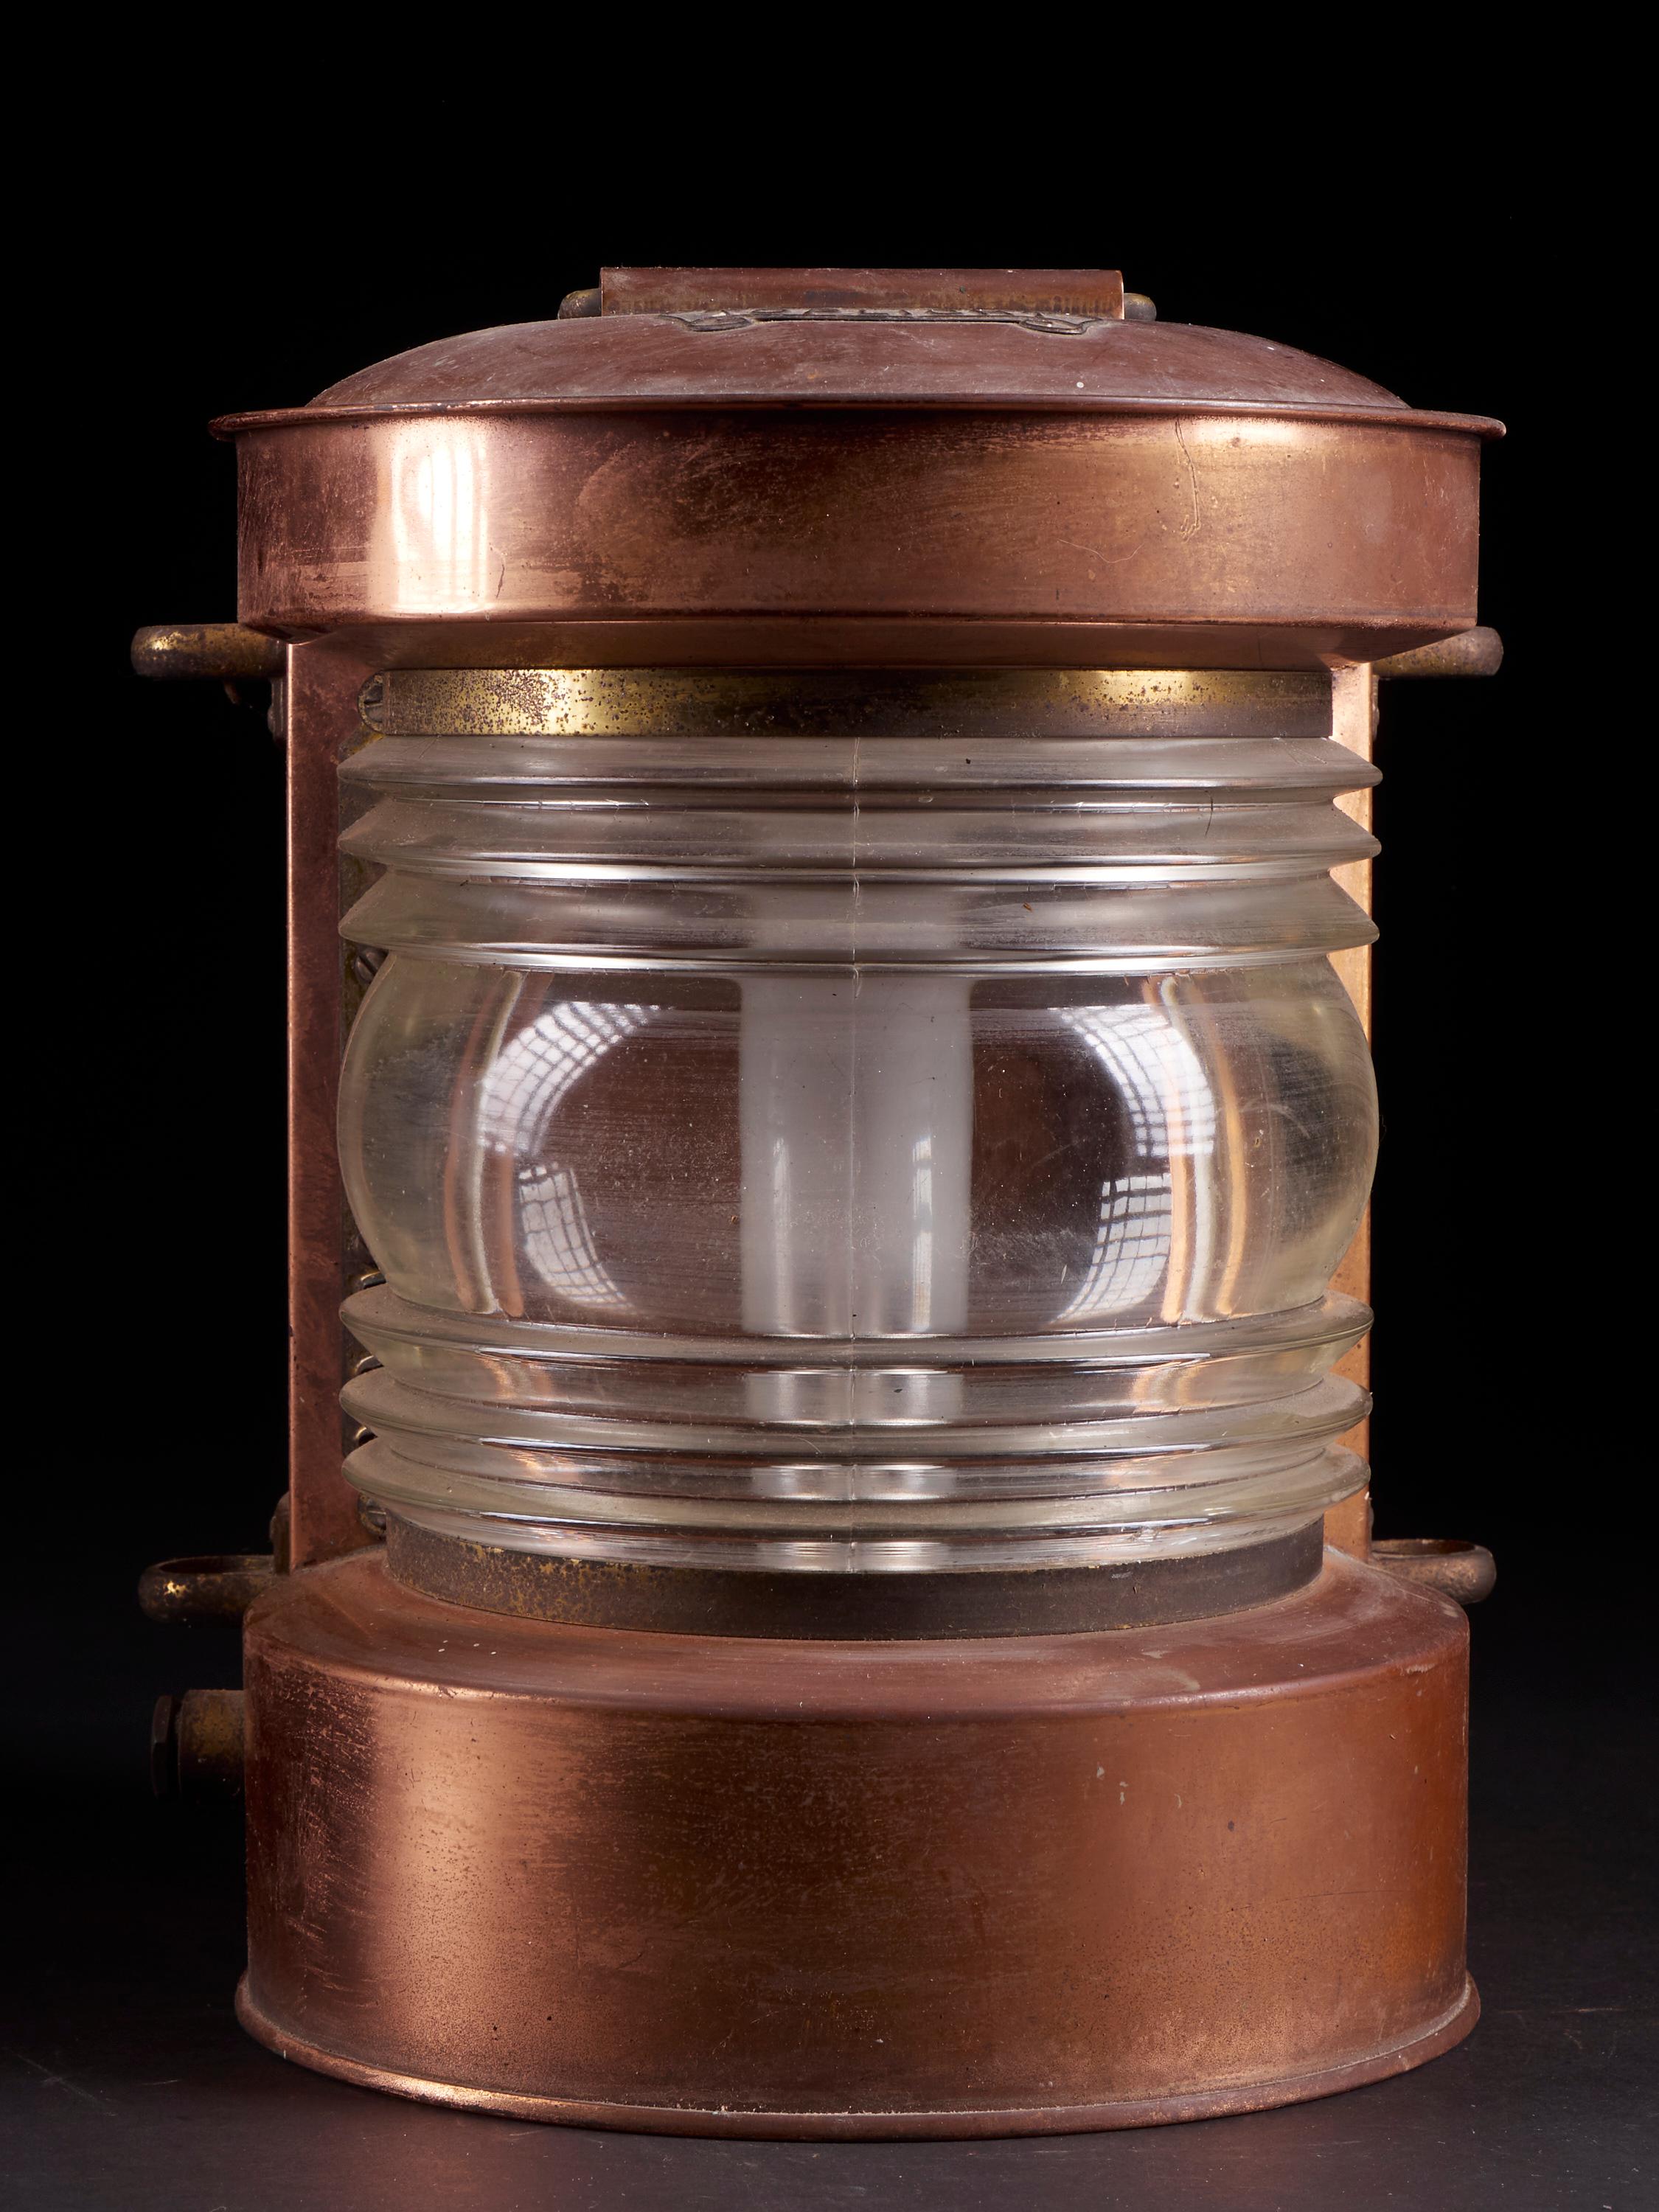 Vintage Art Deco copper alloy Signal lamp from the brand Toplicht with a rectangular box and a rounded, ribbed glass front. The lantern has a bayonet bulb socket and a handle on top.